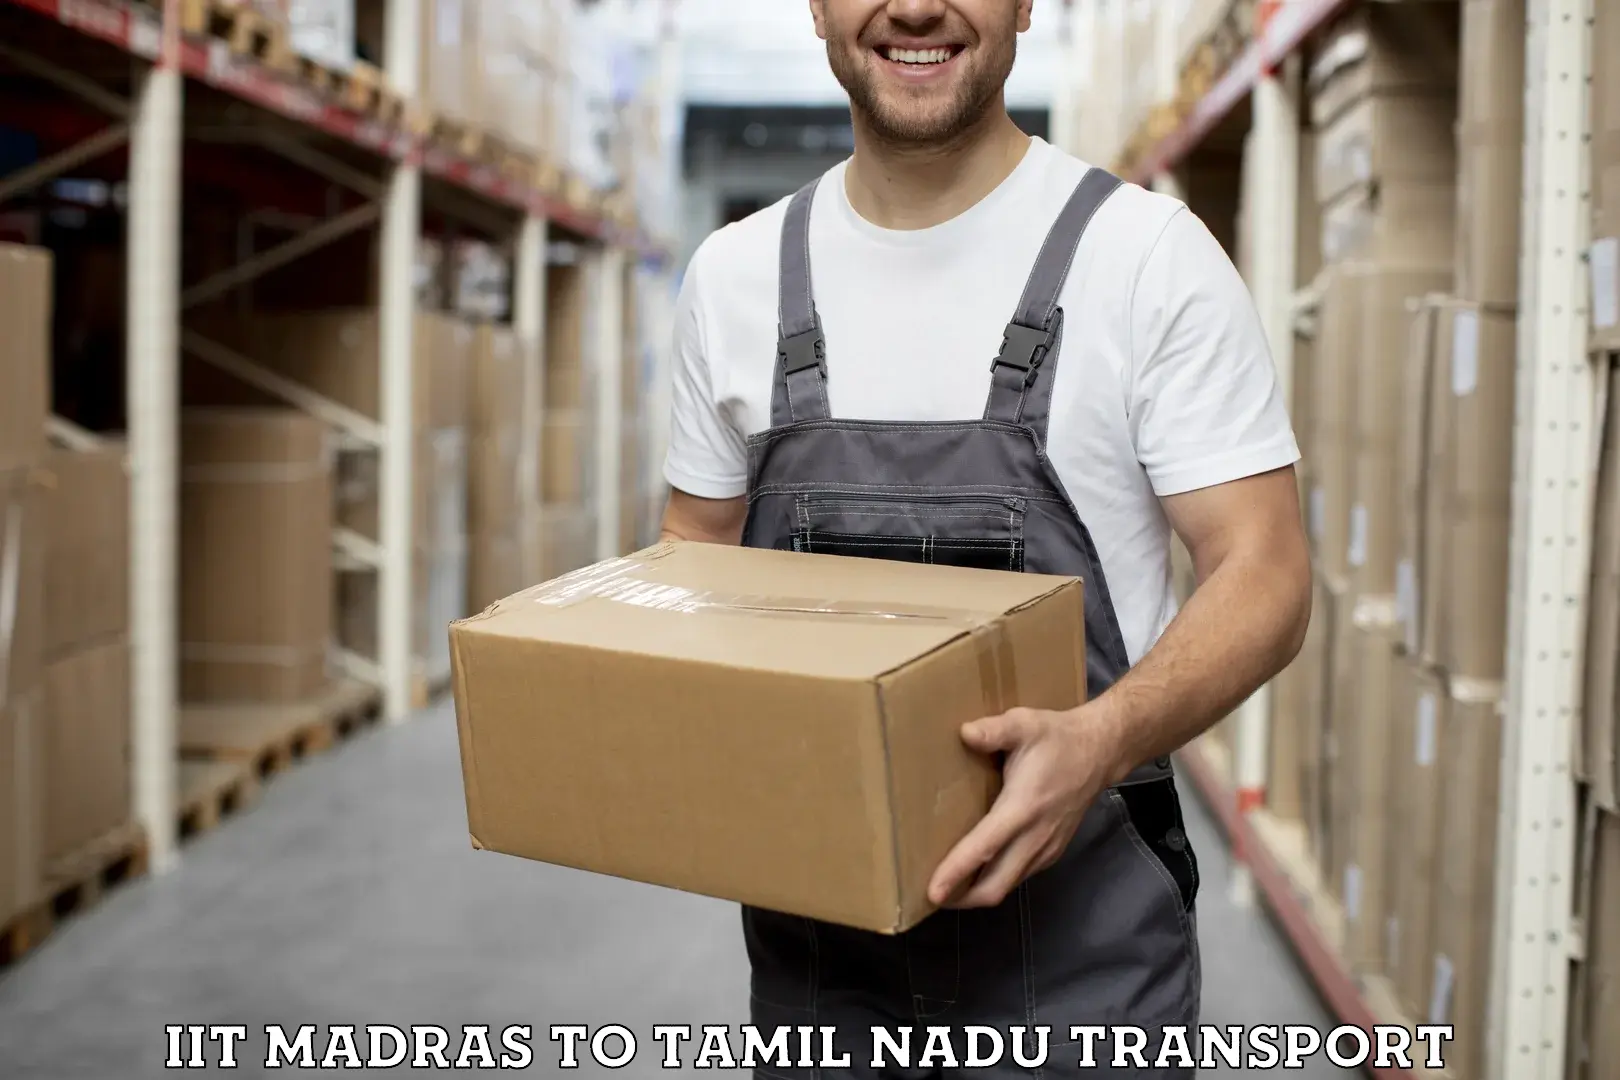 Express transport services IIT Madras to Mettupalayam